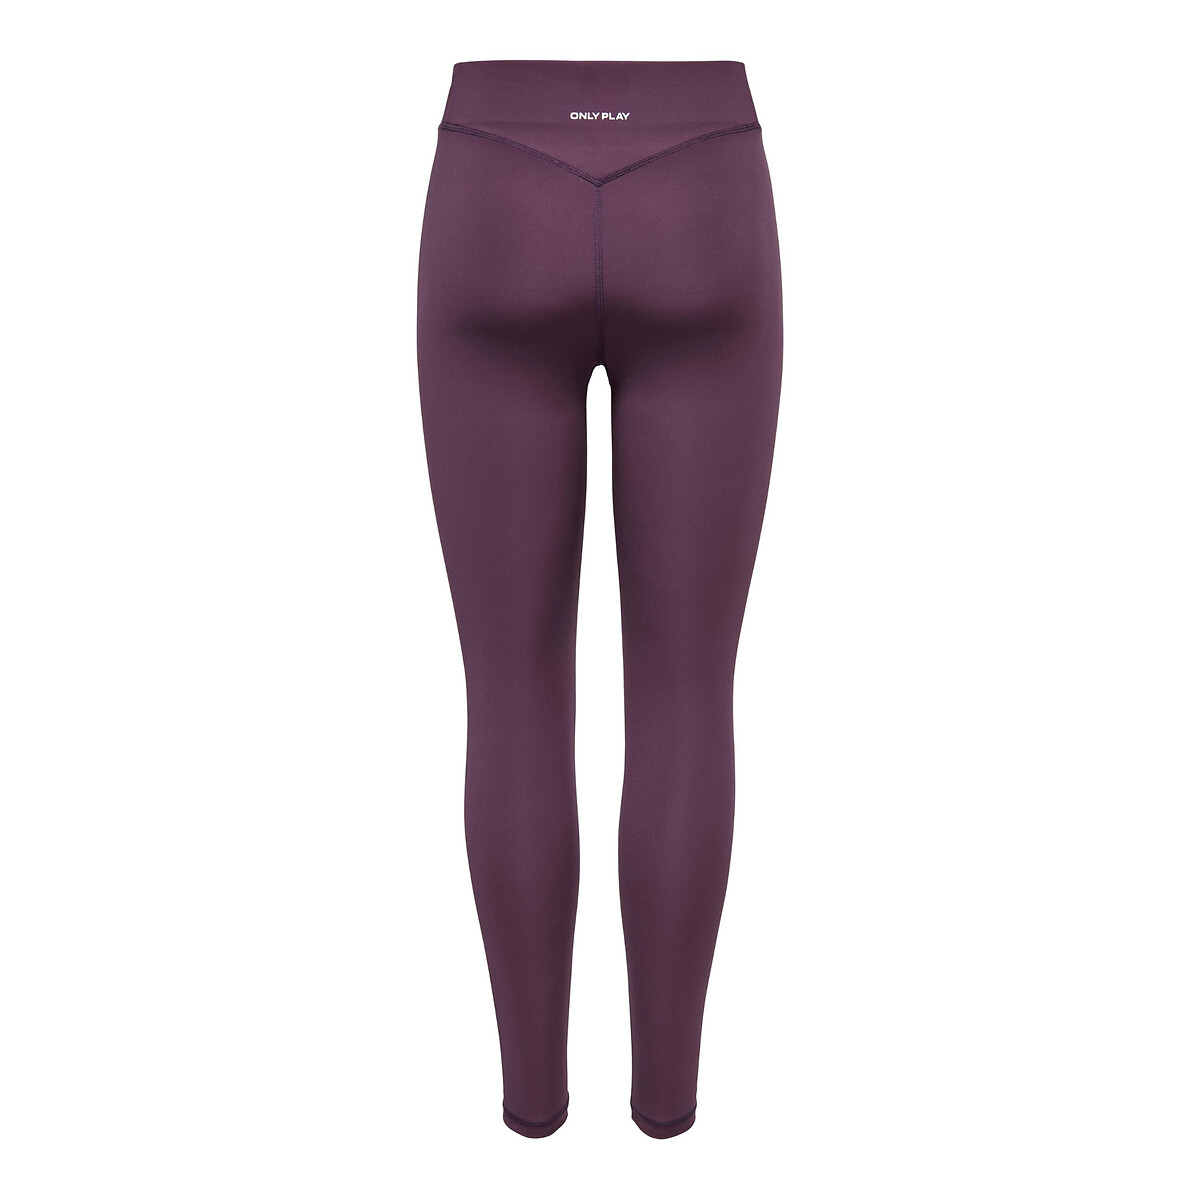 Nada breathable sports leggings with high waist, aubergine, Only Play